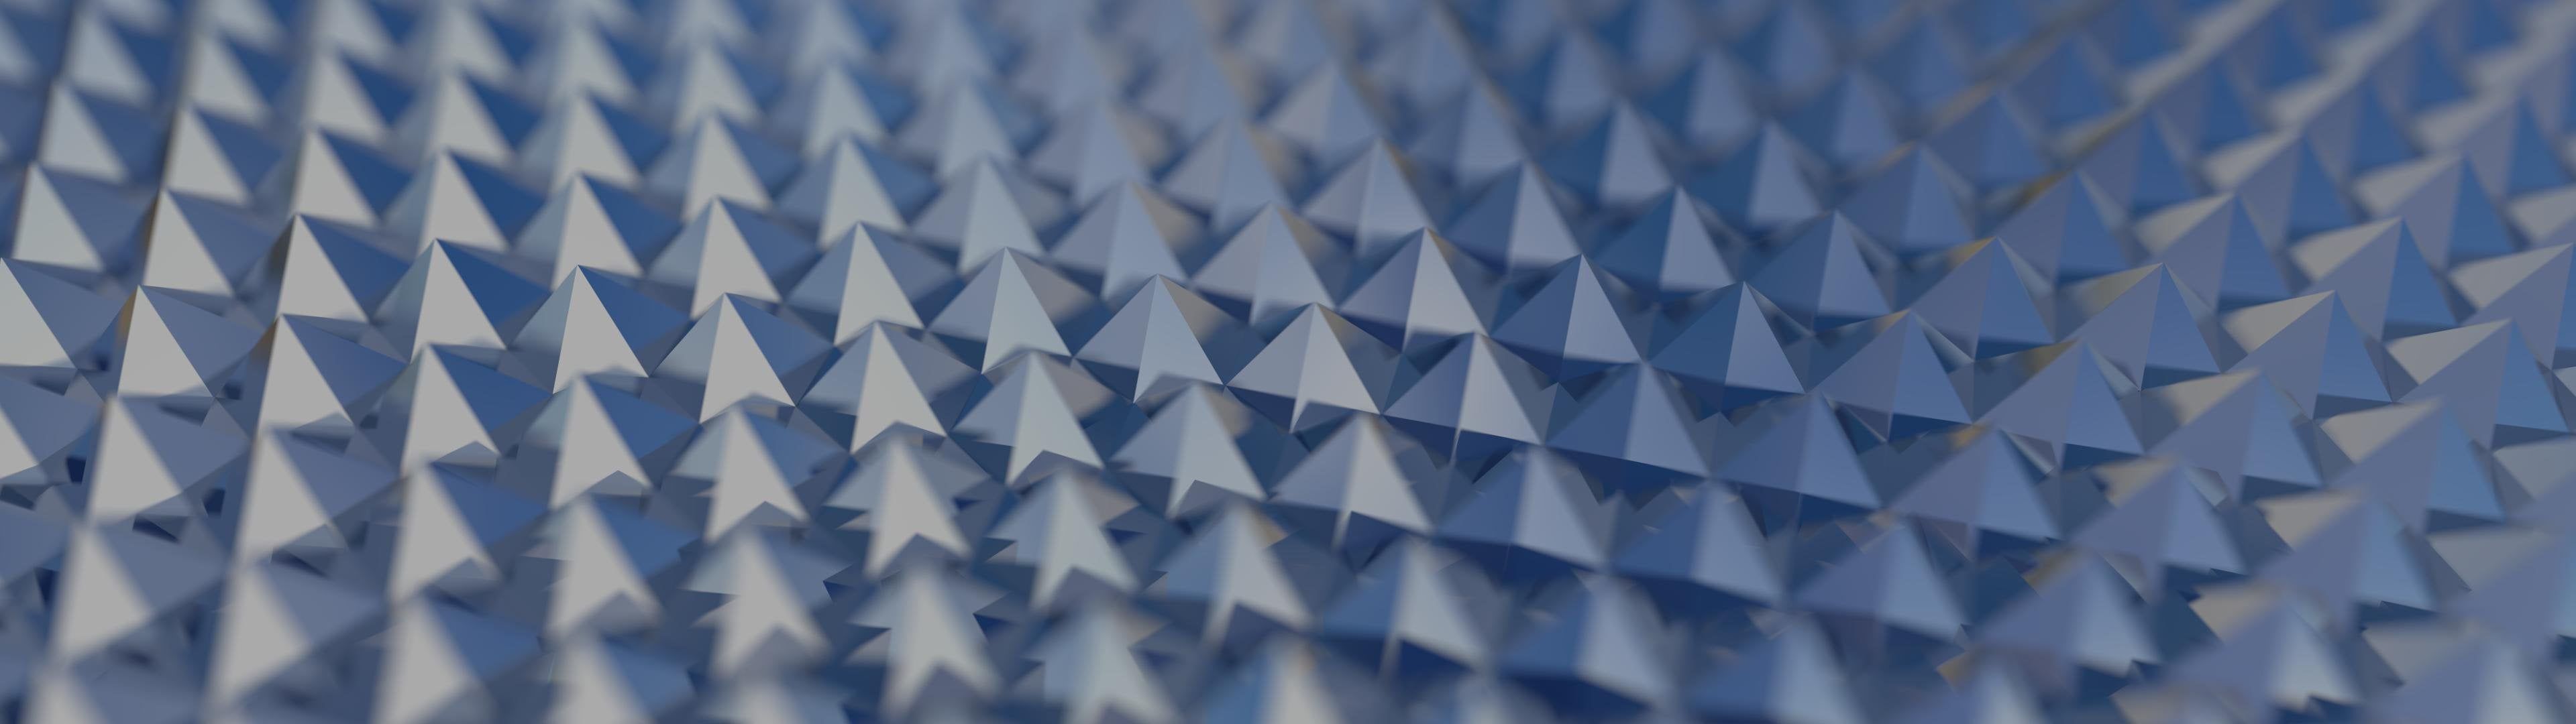 Spikes - Just made this dual screen wallpaper in Blender [3840x1080]